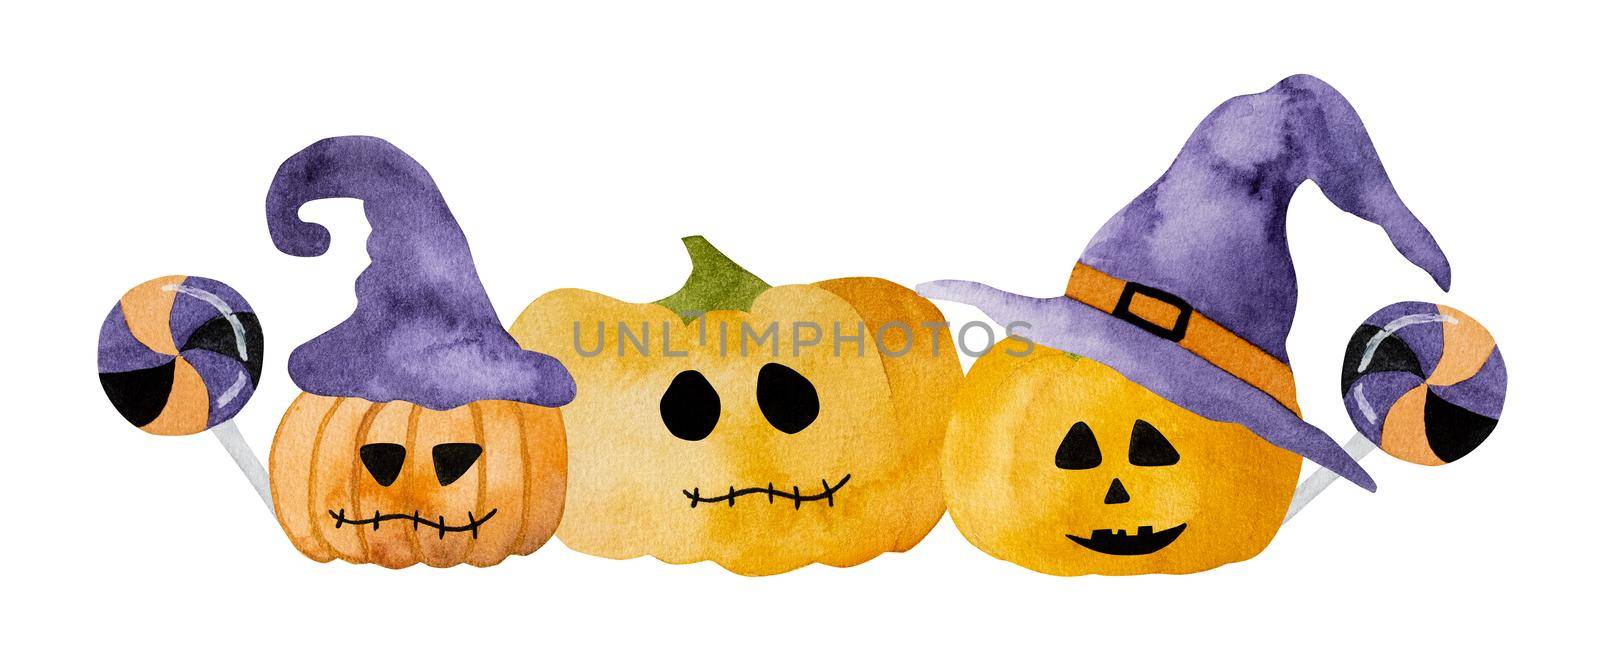 Halloween watercolor pumpkin illustration for funny holiday postcard. Autumn scary vegetables illustration for decoration